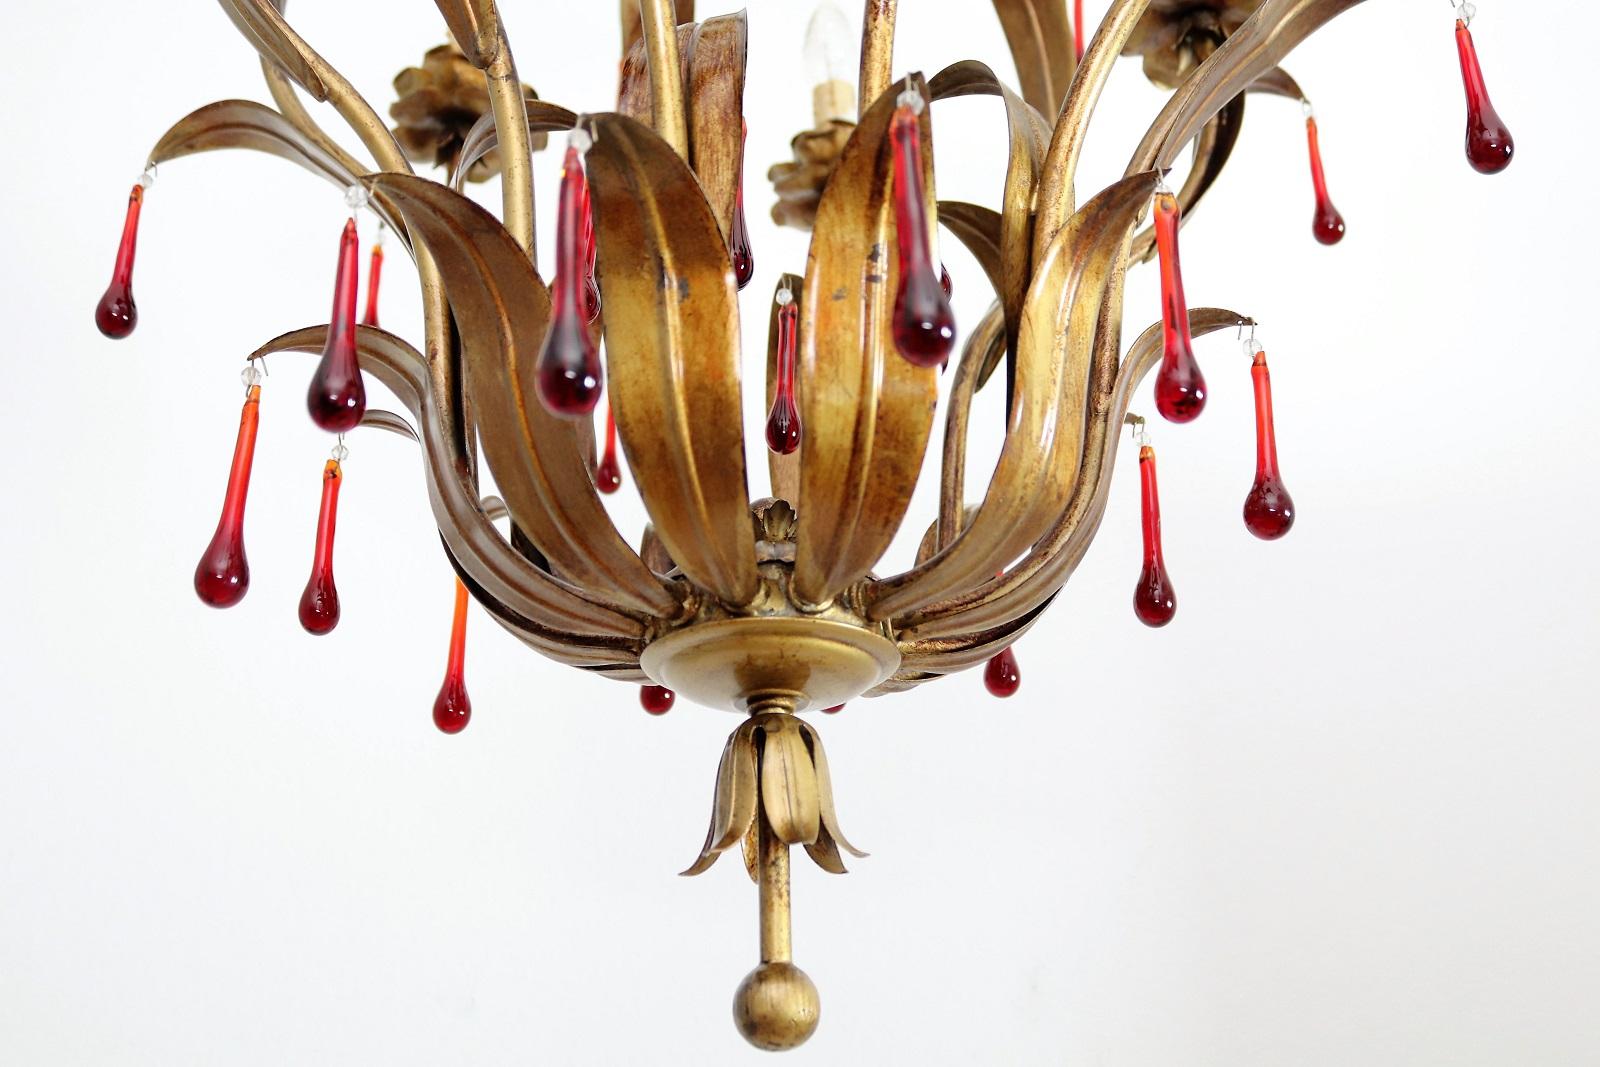 Metal Italian Midcentury Gilt Florentine Chandelier with Red Murano Glass Drops, 1970s For Sale